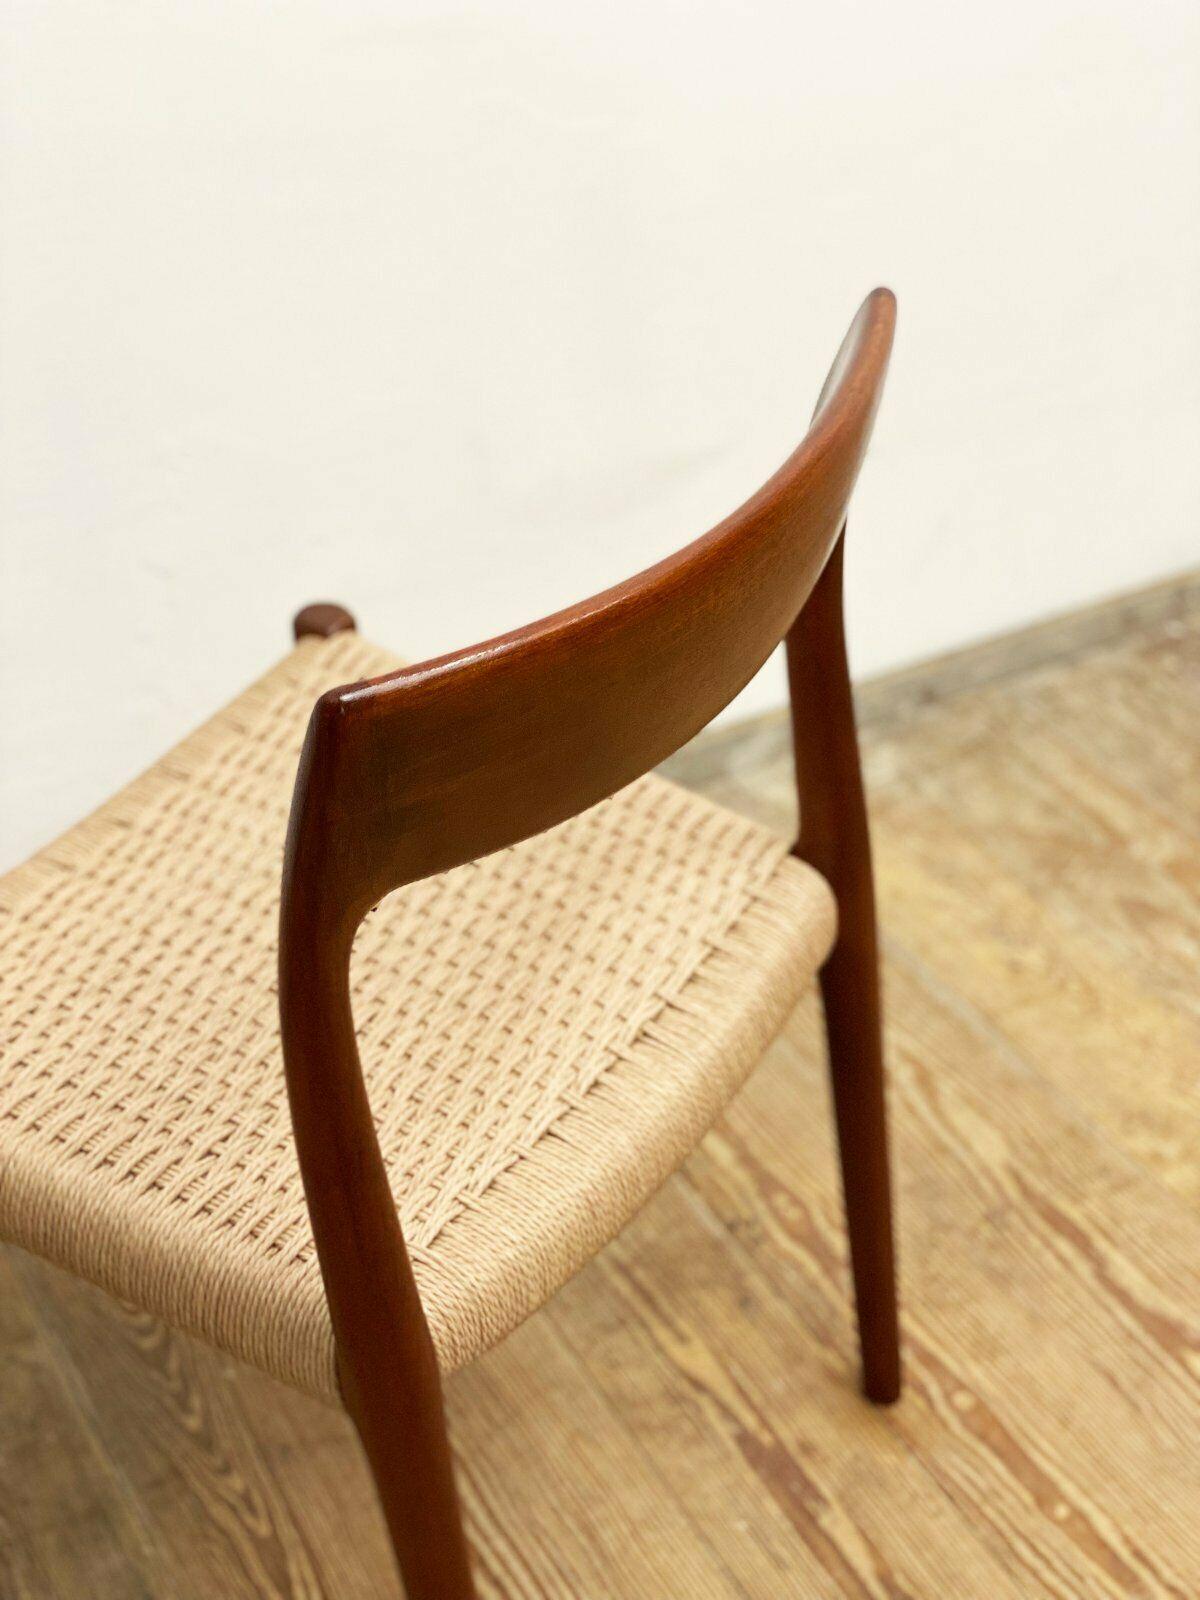 Mid-20th Century Mid-Century Teak Dining or Side Chair #77 by Niels O. Møller for J. L. Moller